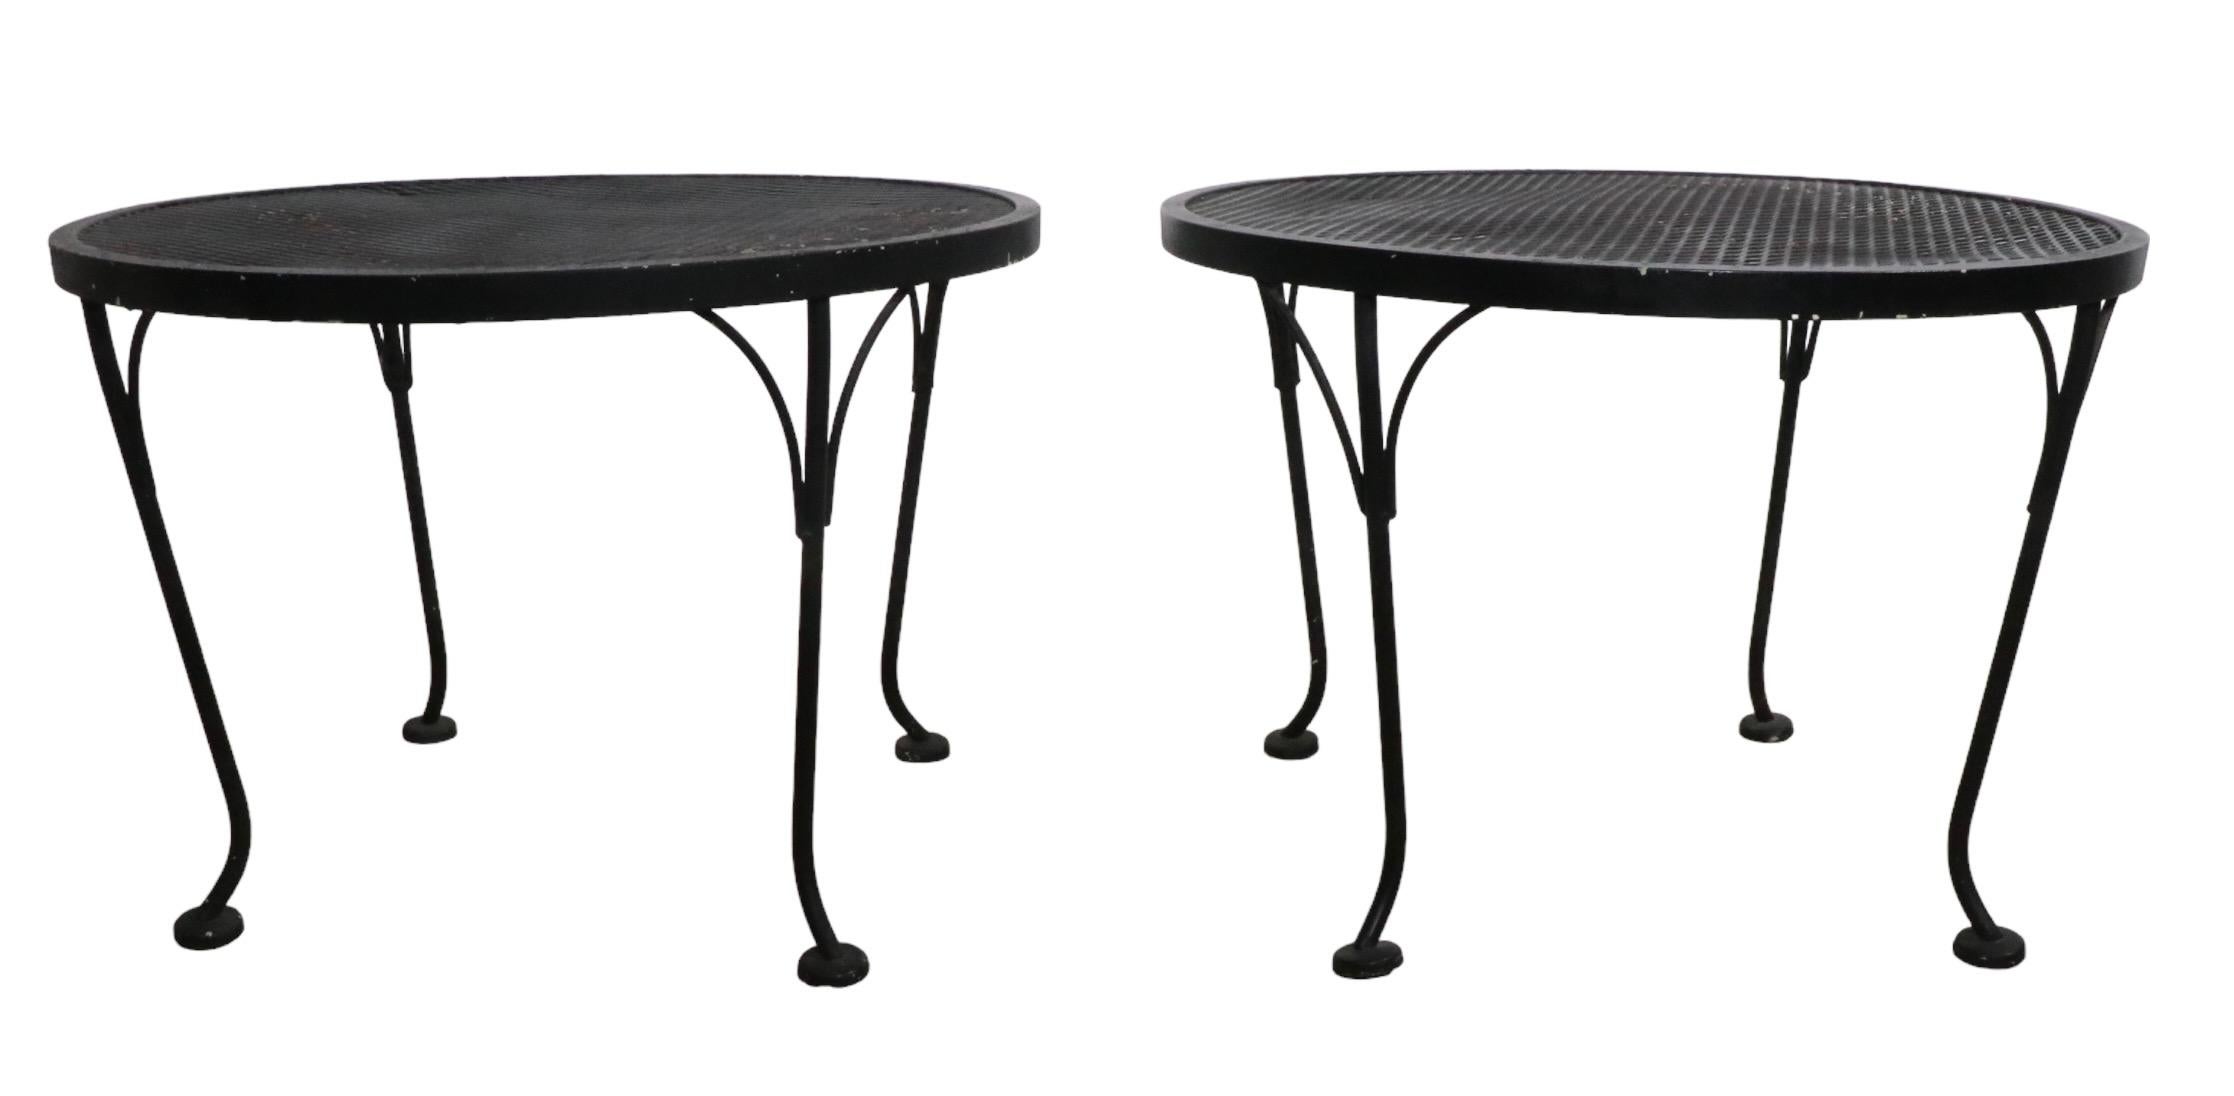 Wrought Iron and Metal Mesh Garden Patio Poolside Side Tables by Woodard 3